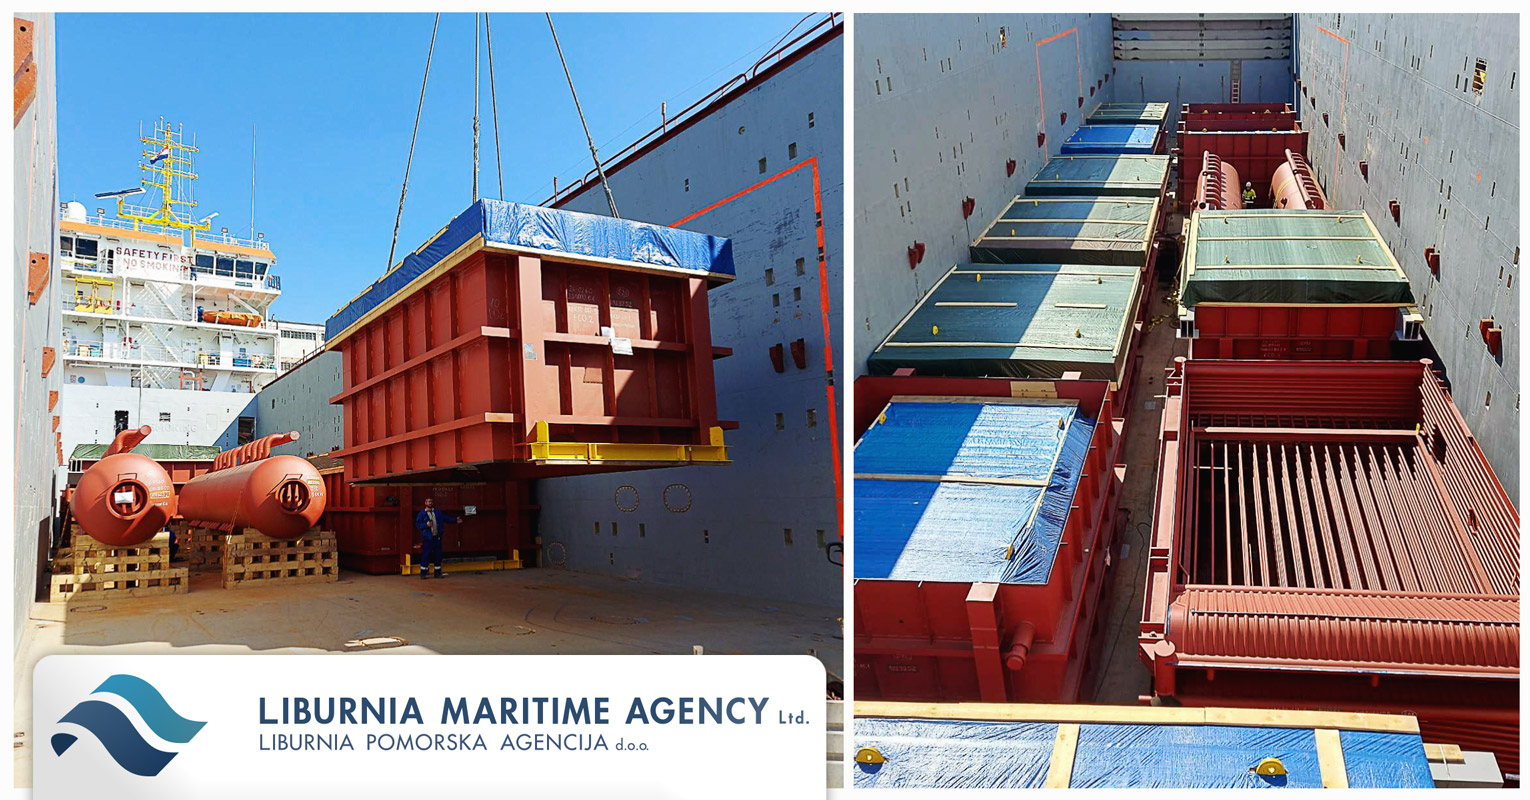 Liburnia Maritime Agency Loaded the 2nd Lot of a Big Project to UK